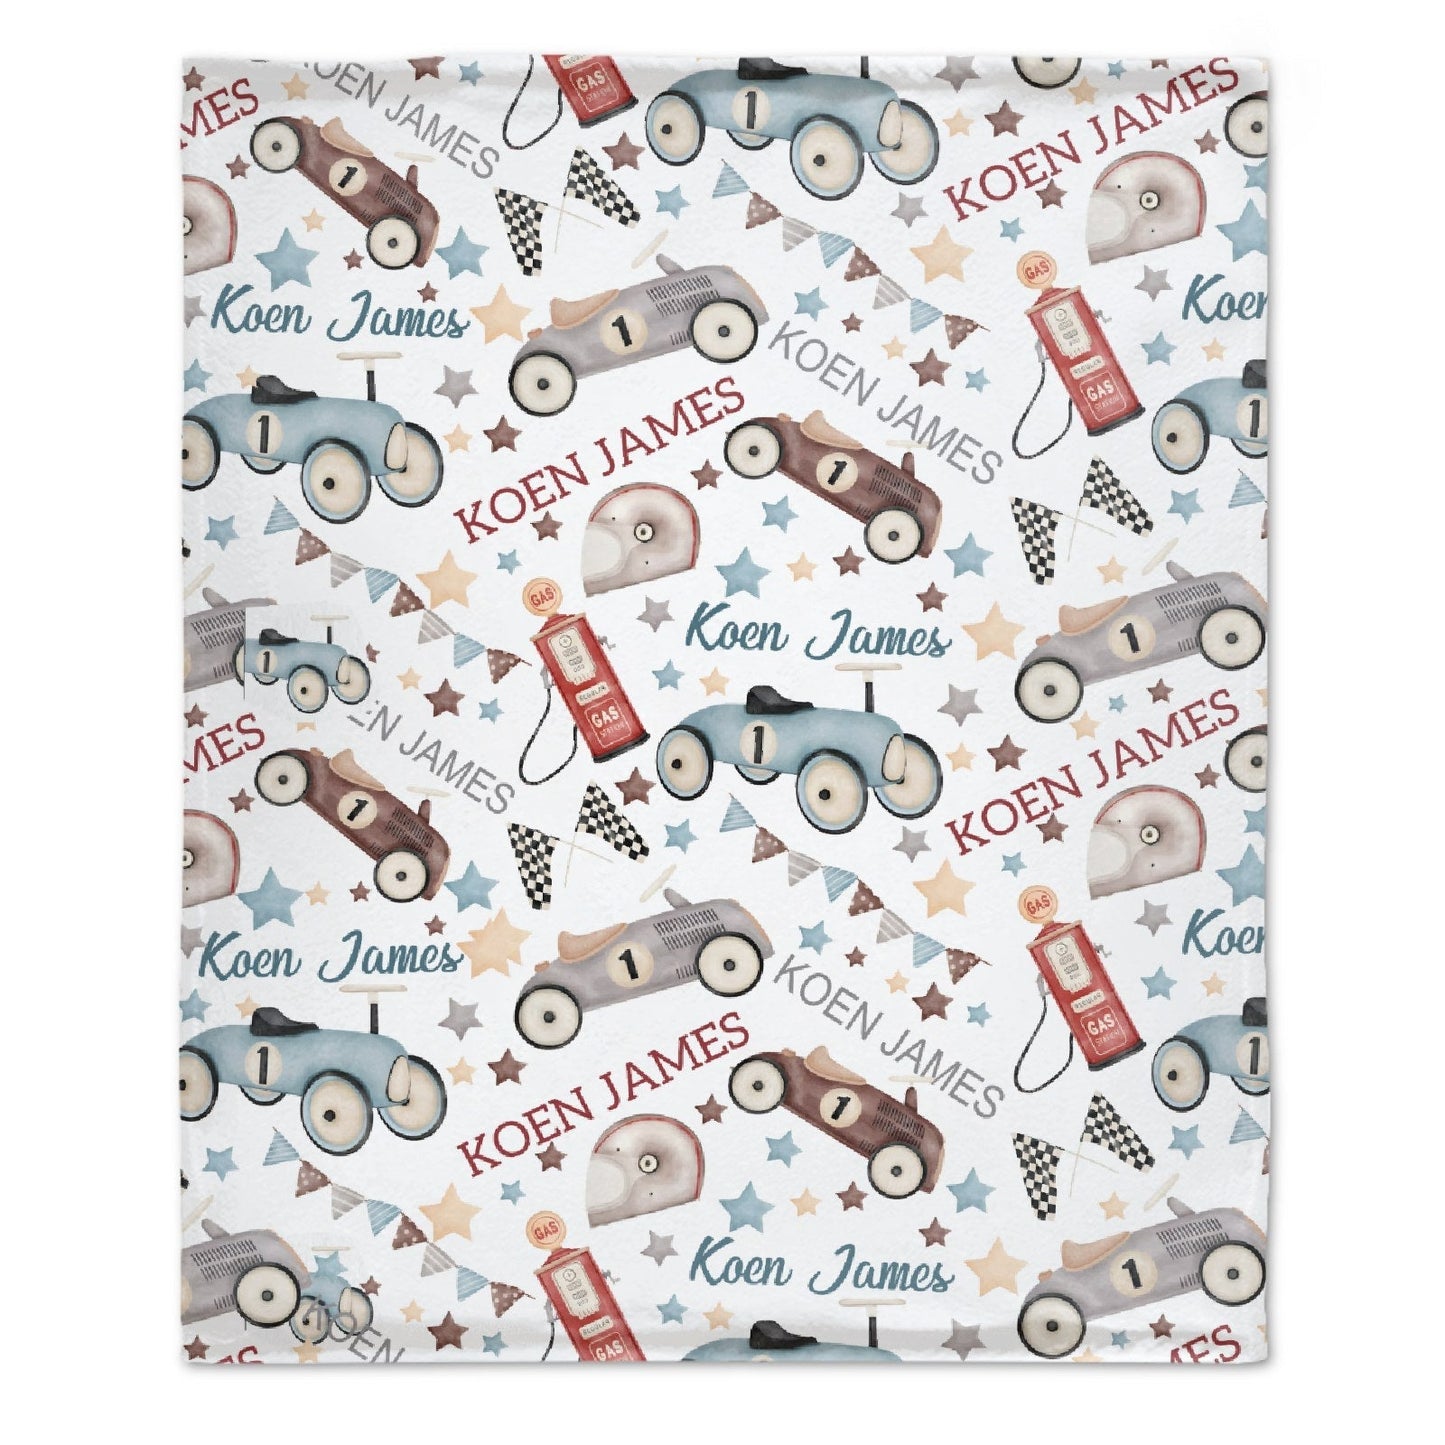 ️Personalized Vintage Toy Car Race car Baby Boy Blanket